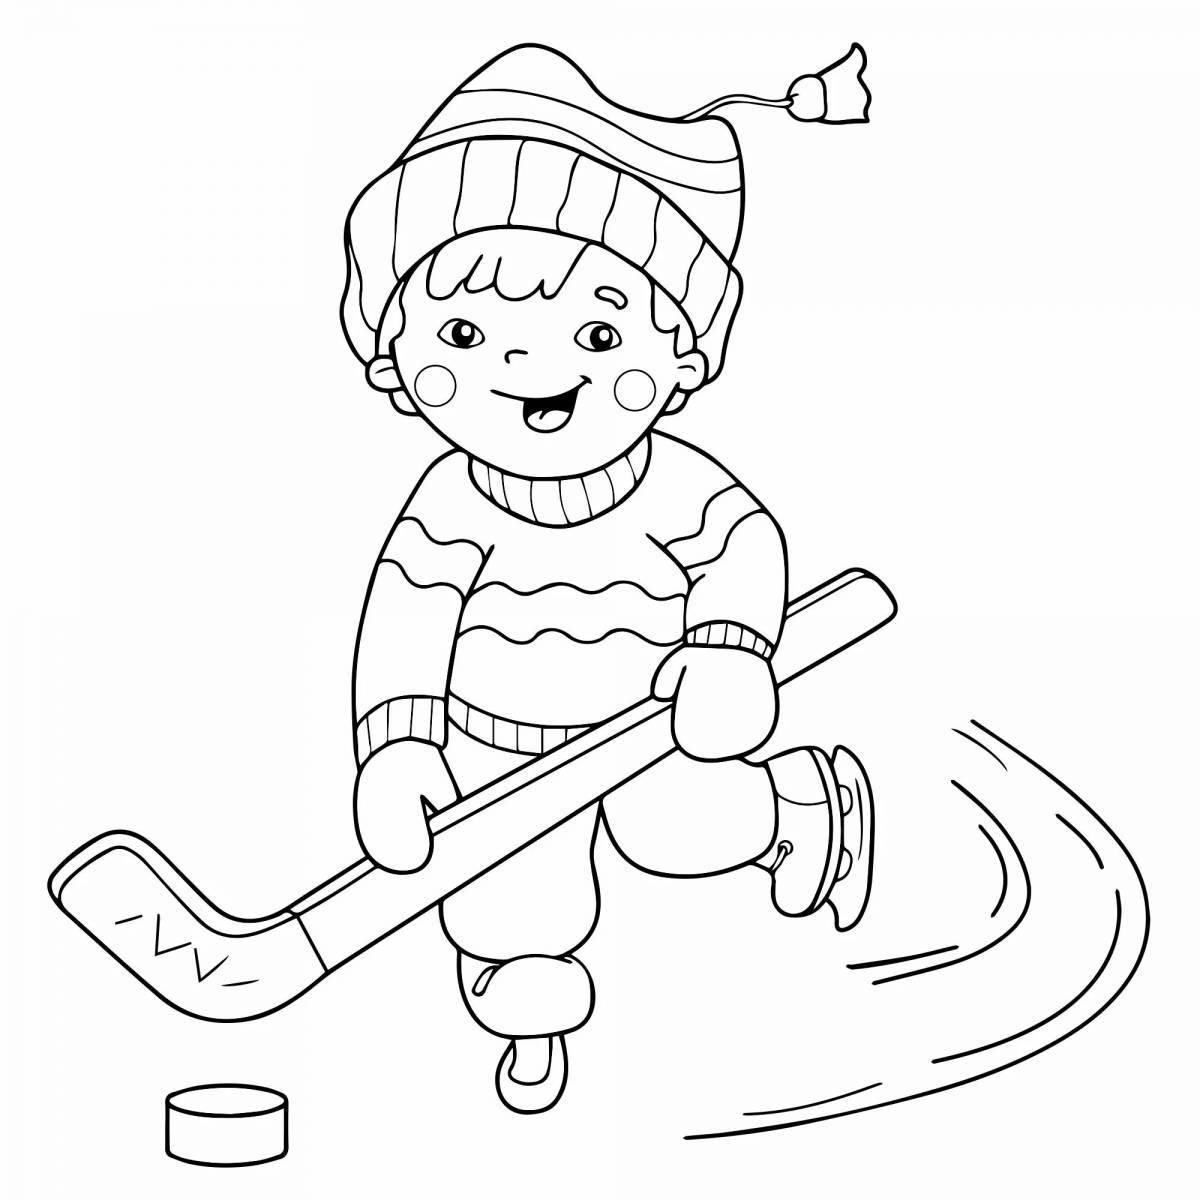 Fun coloring book for kids about winter sports